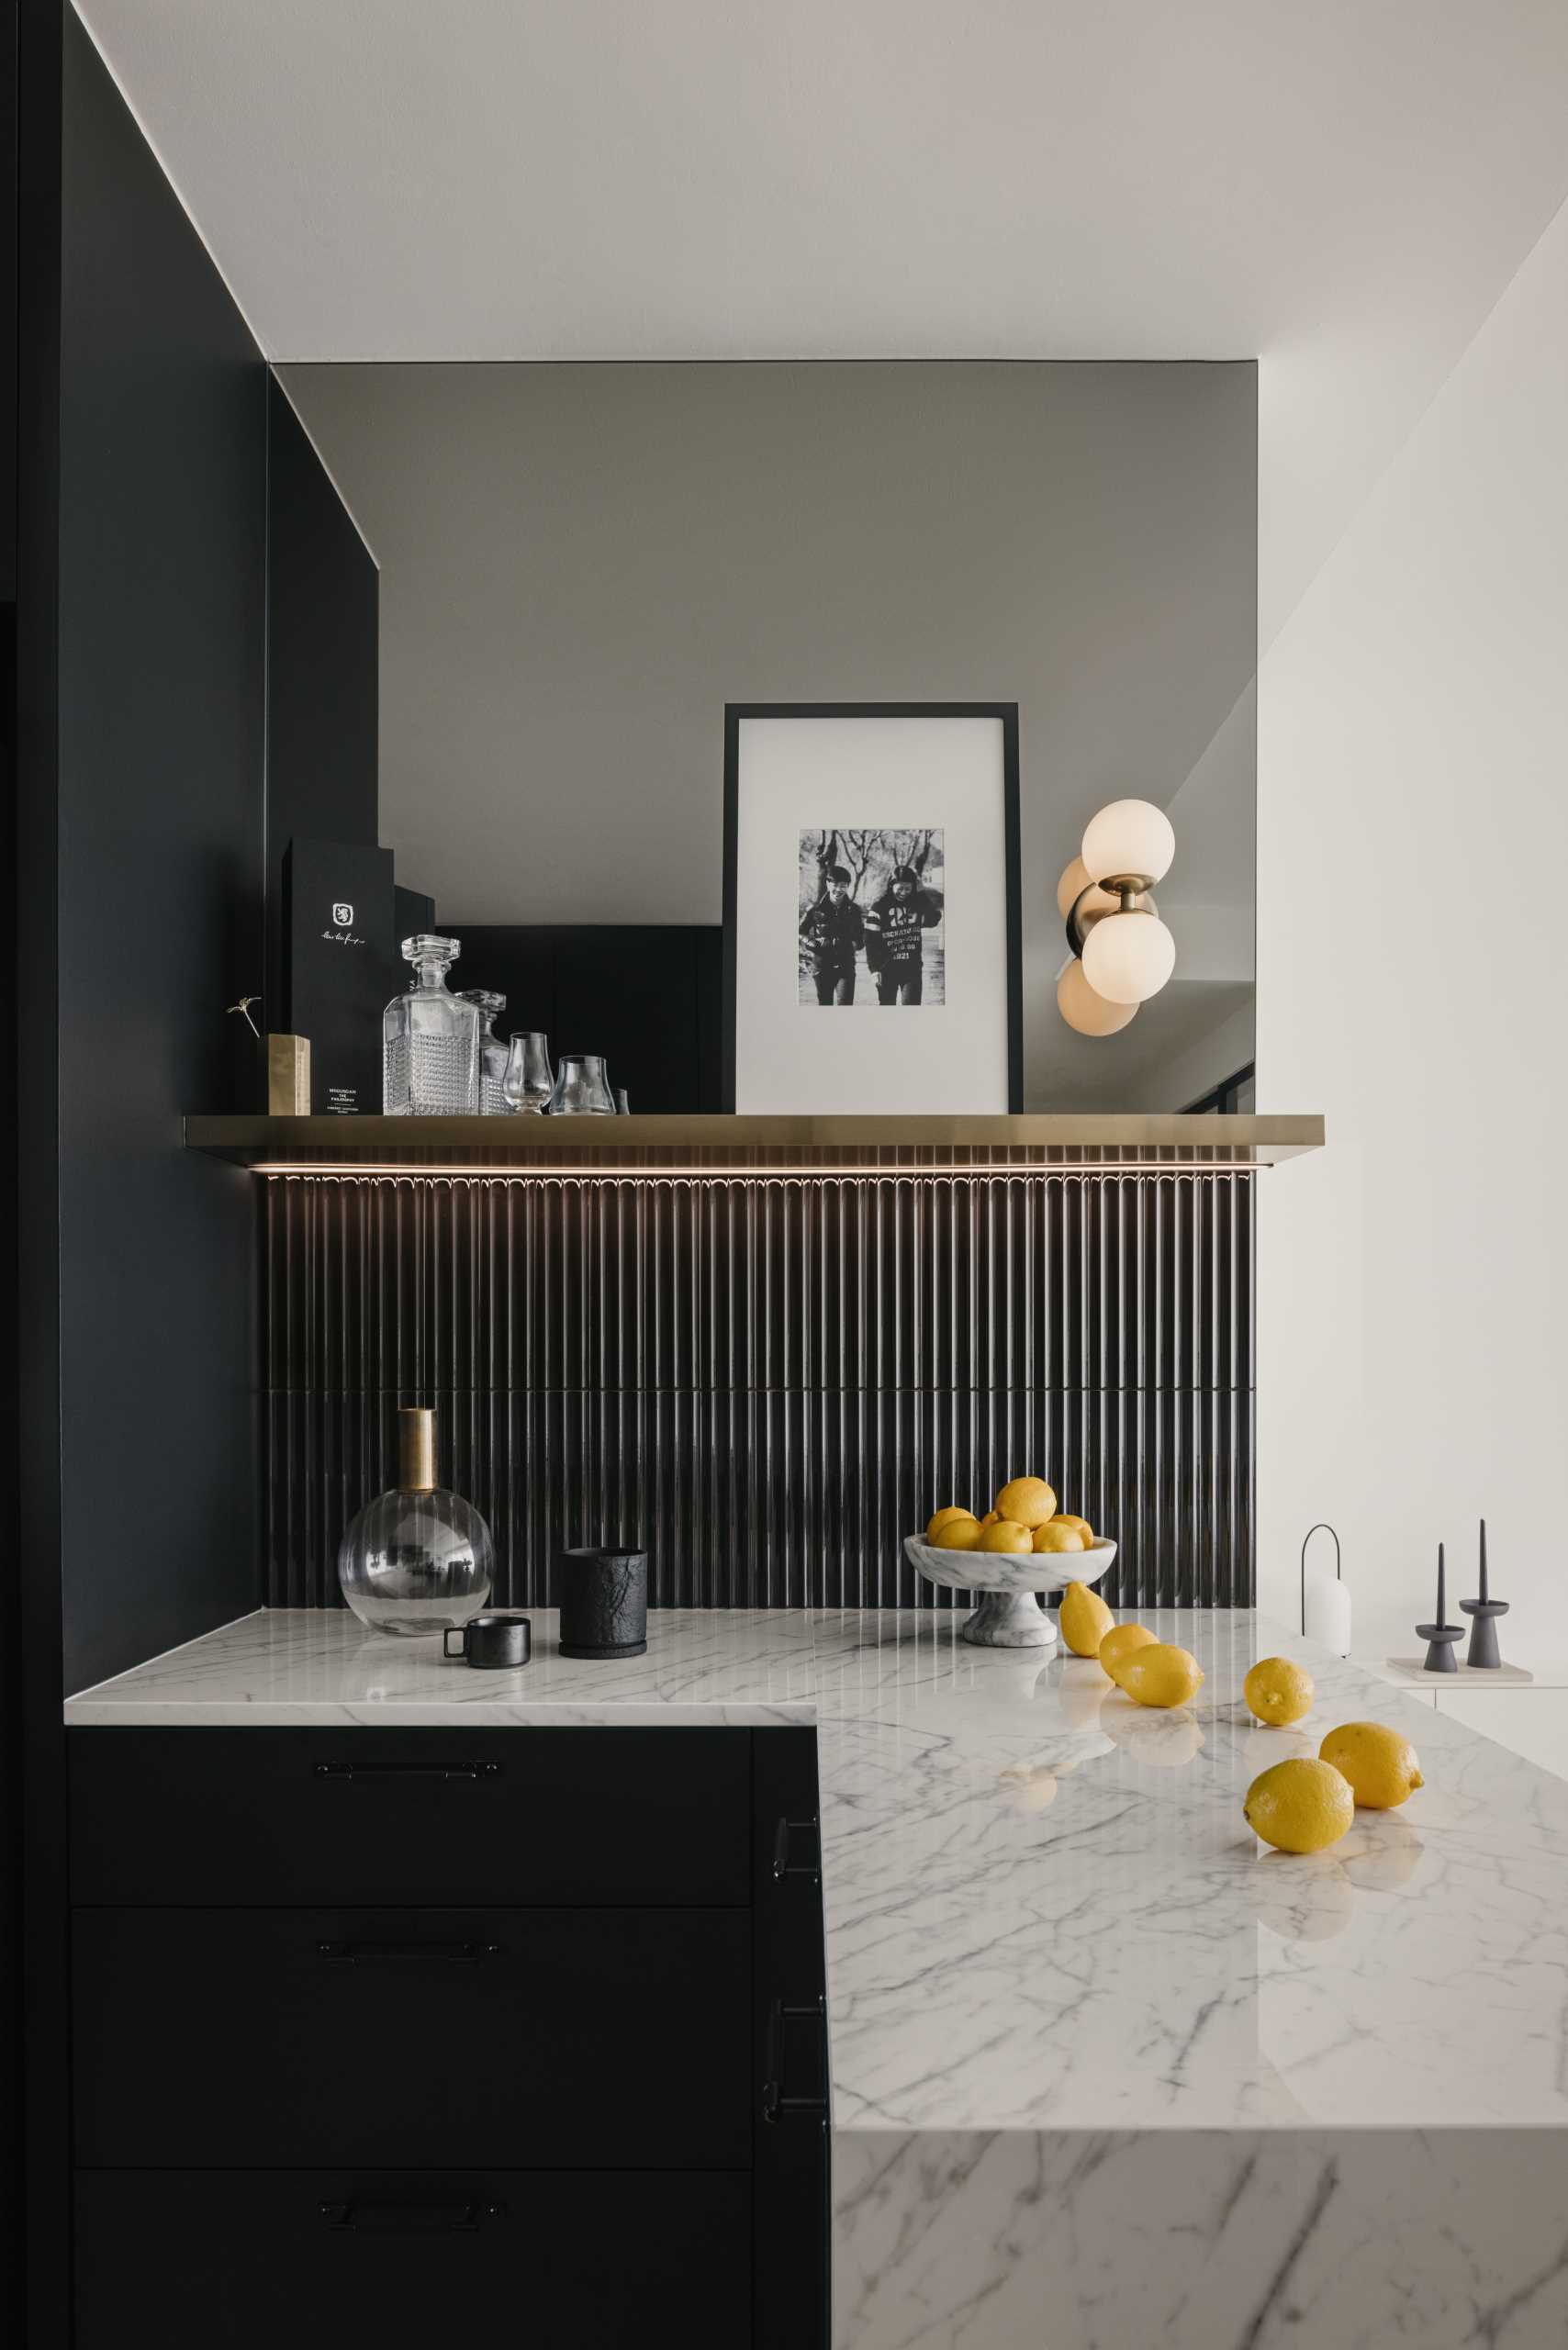 In this black and white kitchen, matte black cabinets and walls contrast the countertops and backsplash. Tiles and a blind add a textural element, while a mirrored area of the wall adds a touch of elegance and makes the space feel larger.